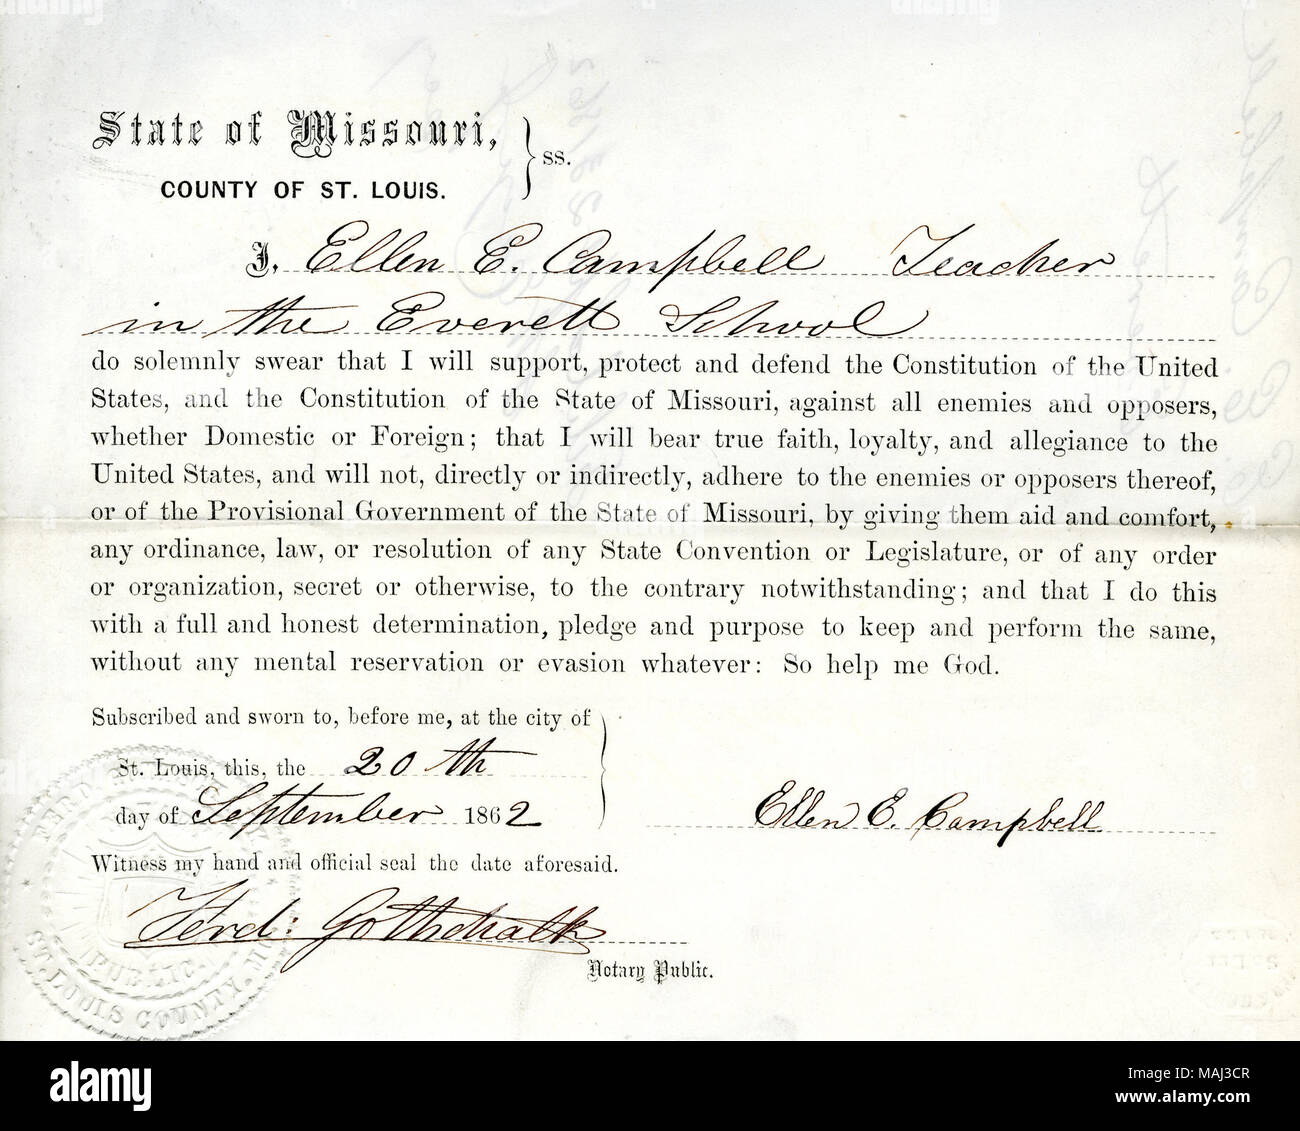 Swears oath of allegiance to the Government of the United States and the State of Missouri. Title: Loyalty oath of Ellen E. Campbell of Missouri, County of St. Louis  . 23 September 1862. Campbell, E.E. Stock Photo